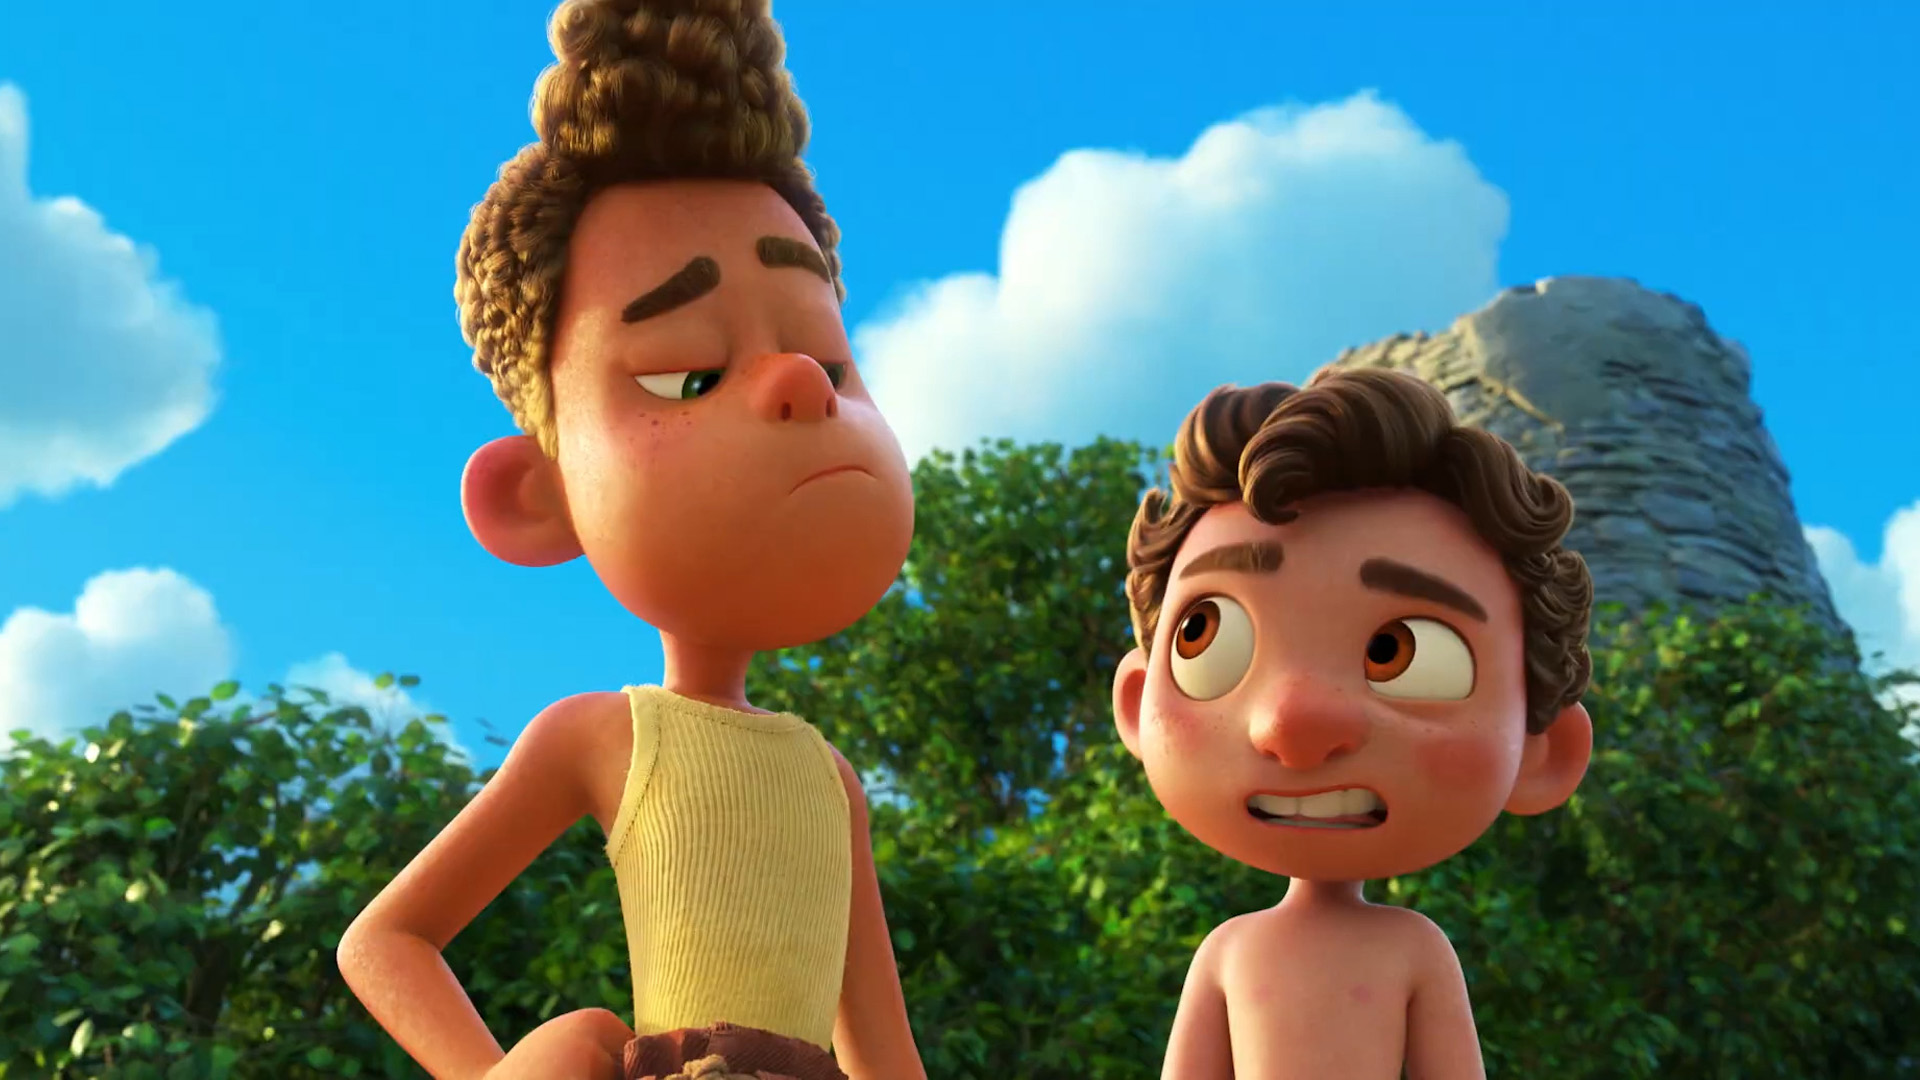 Pixar’s ‘Luca’ Was The Most-Streamed Movie of 2021